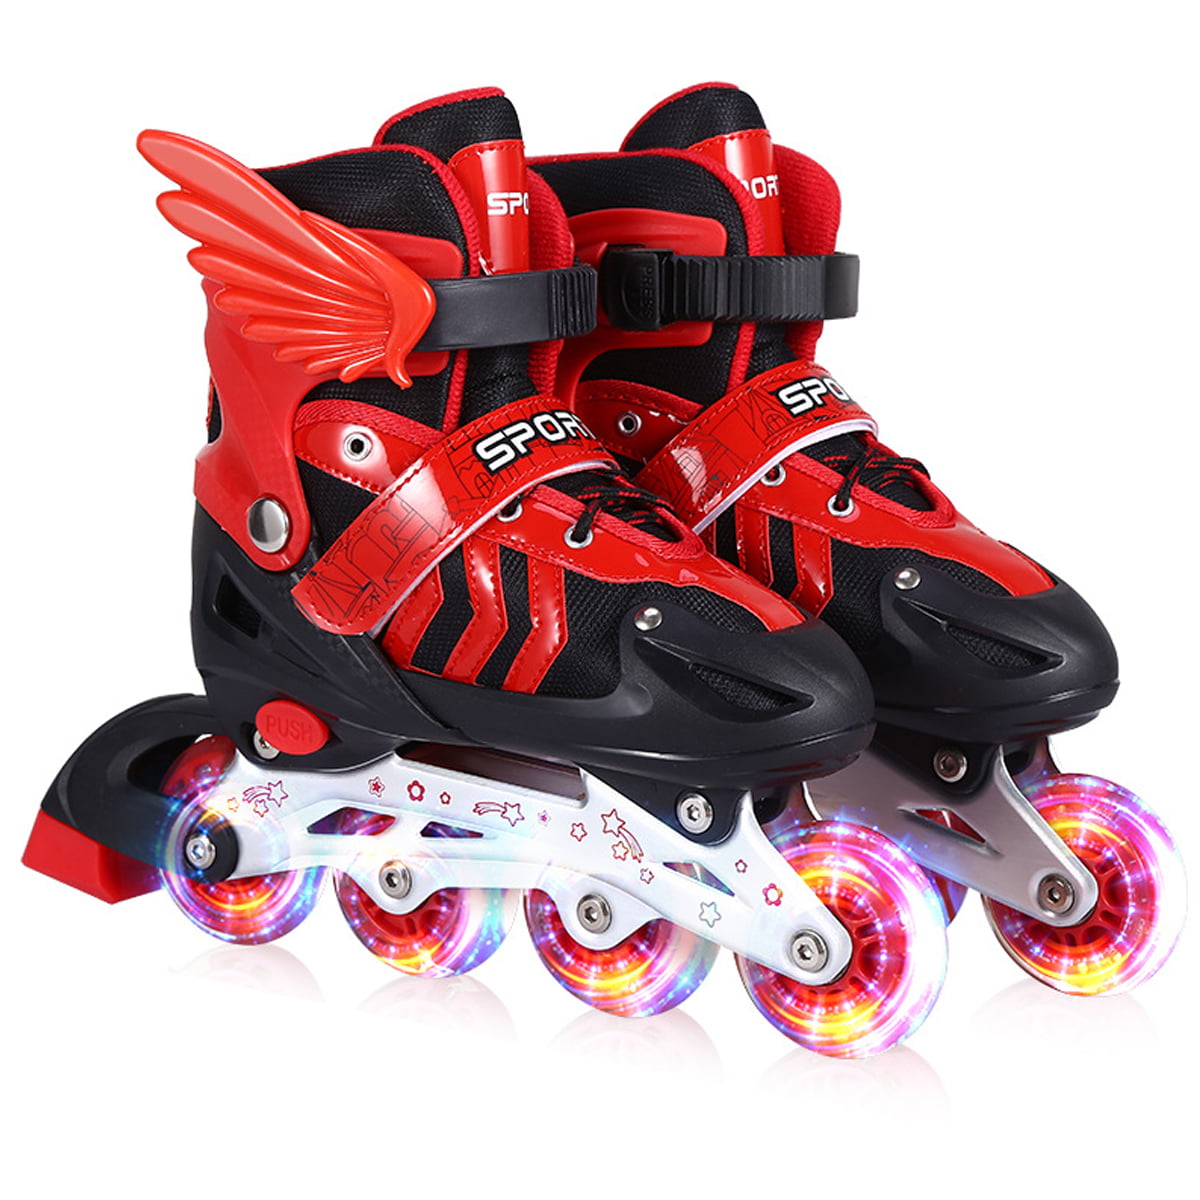 for Kids with Full Light Up Wheels,Childrens Inline Skates for Indoor & Outdoor Skating for Boys,Girls JIFAR Adjustable Inline Skates Beginners,Medium & Small Includs Free 2 Wheels & Bag 